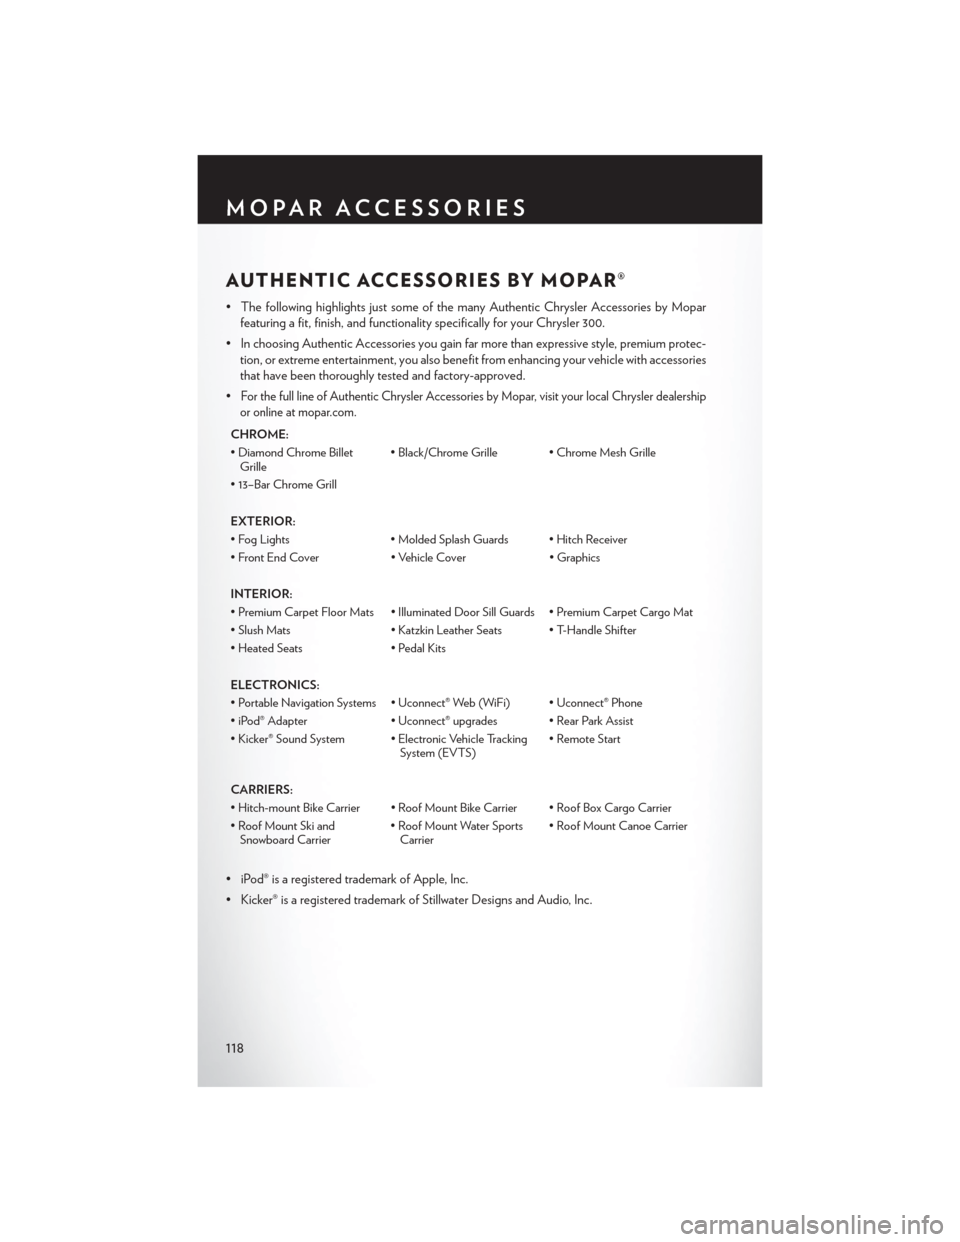 CHRYSLER 300 2013 2.G User Guide AUTHENTIC ACCESSORIES BY MOPAR®
• The following highlights just some of the many Authentic Chrysler Accessories by Moparfeaturing a fit, finish, and functionality specifically for your Chrysler 300